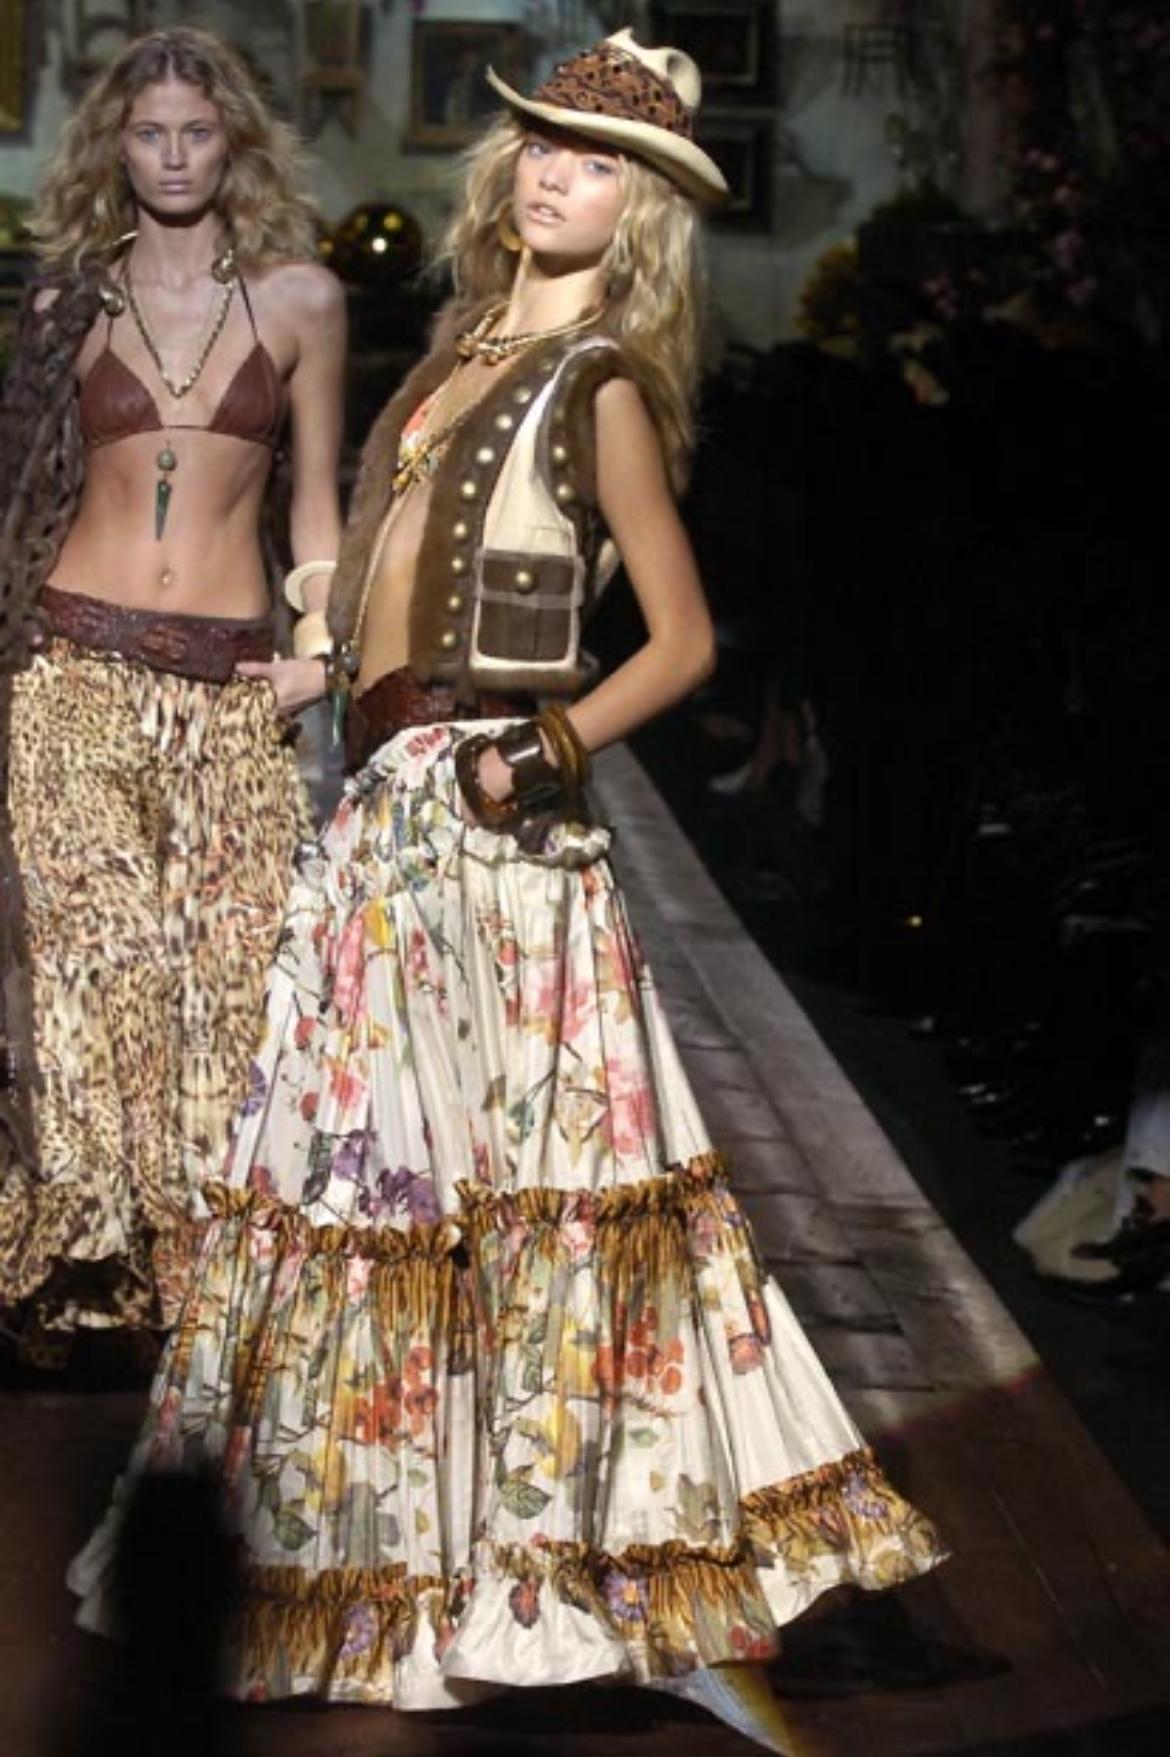 Presenting a gorgeous dark brown maxi skirt by Roberto Cavalli from the Spring/Summer 2005 collection. Similar designs of maxi skirts were showcased on the season's runway. This fabulous skirt features layers of ruched silk and is made complete with